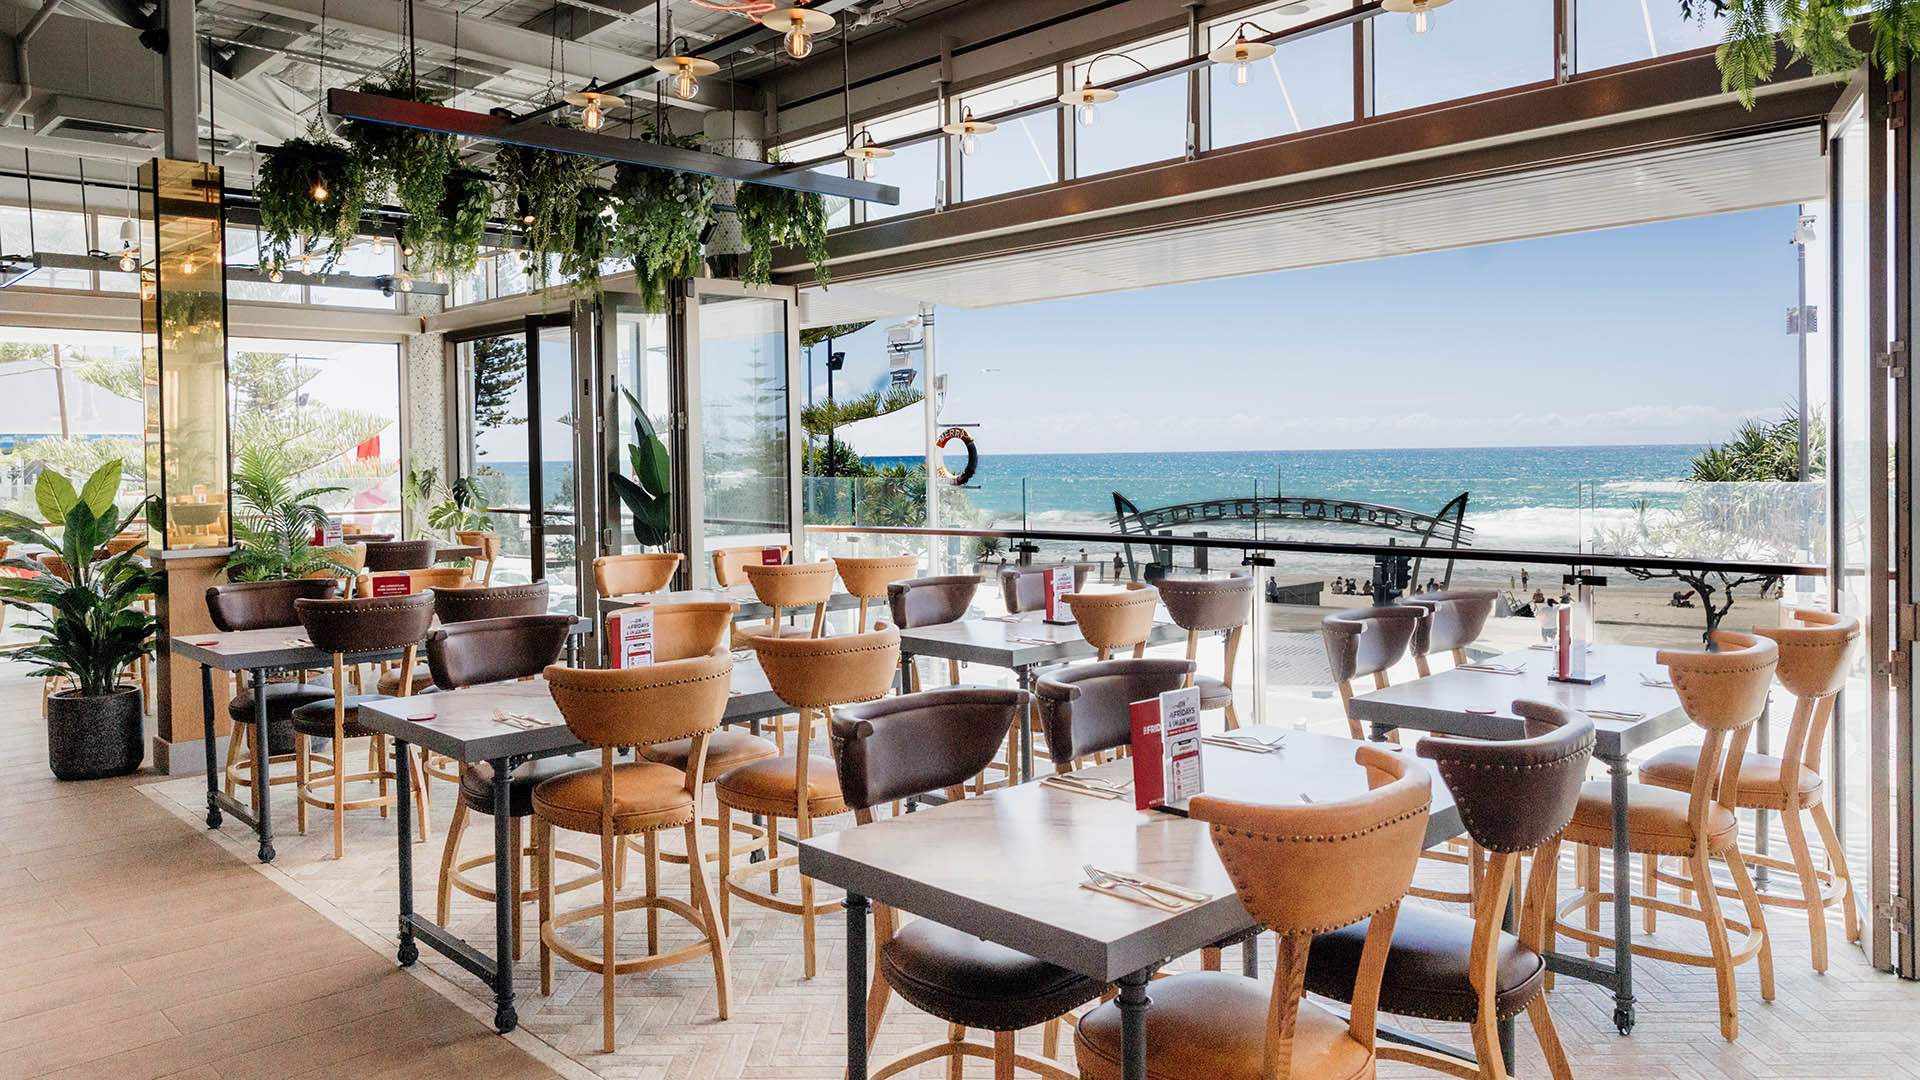 Now Open: TGI Fridays' New Surfers Paradise Bar and Grill Is the Chain's First-Ever Beachside Venue